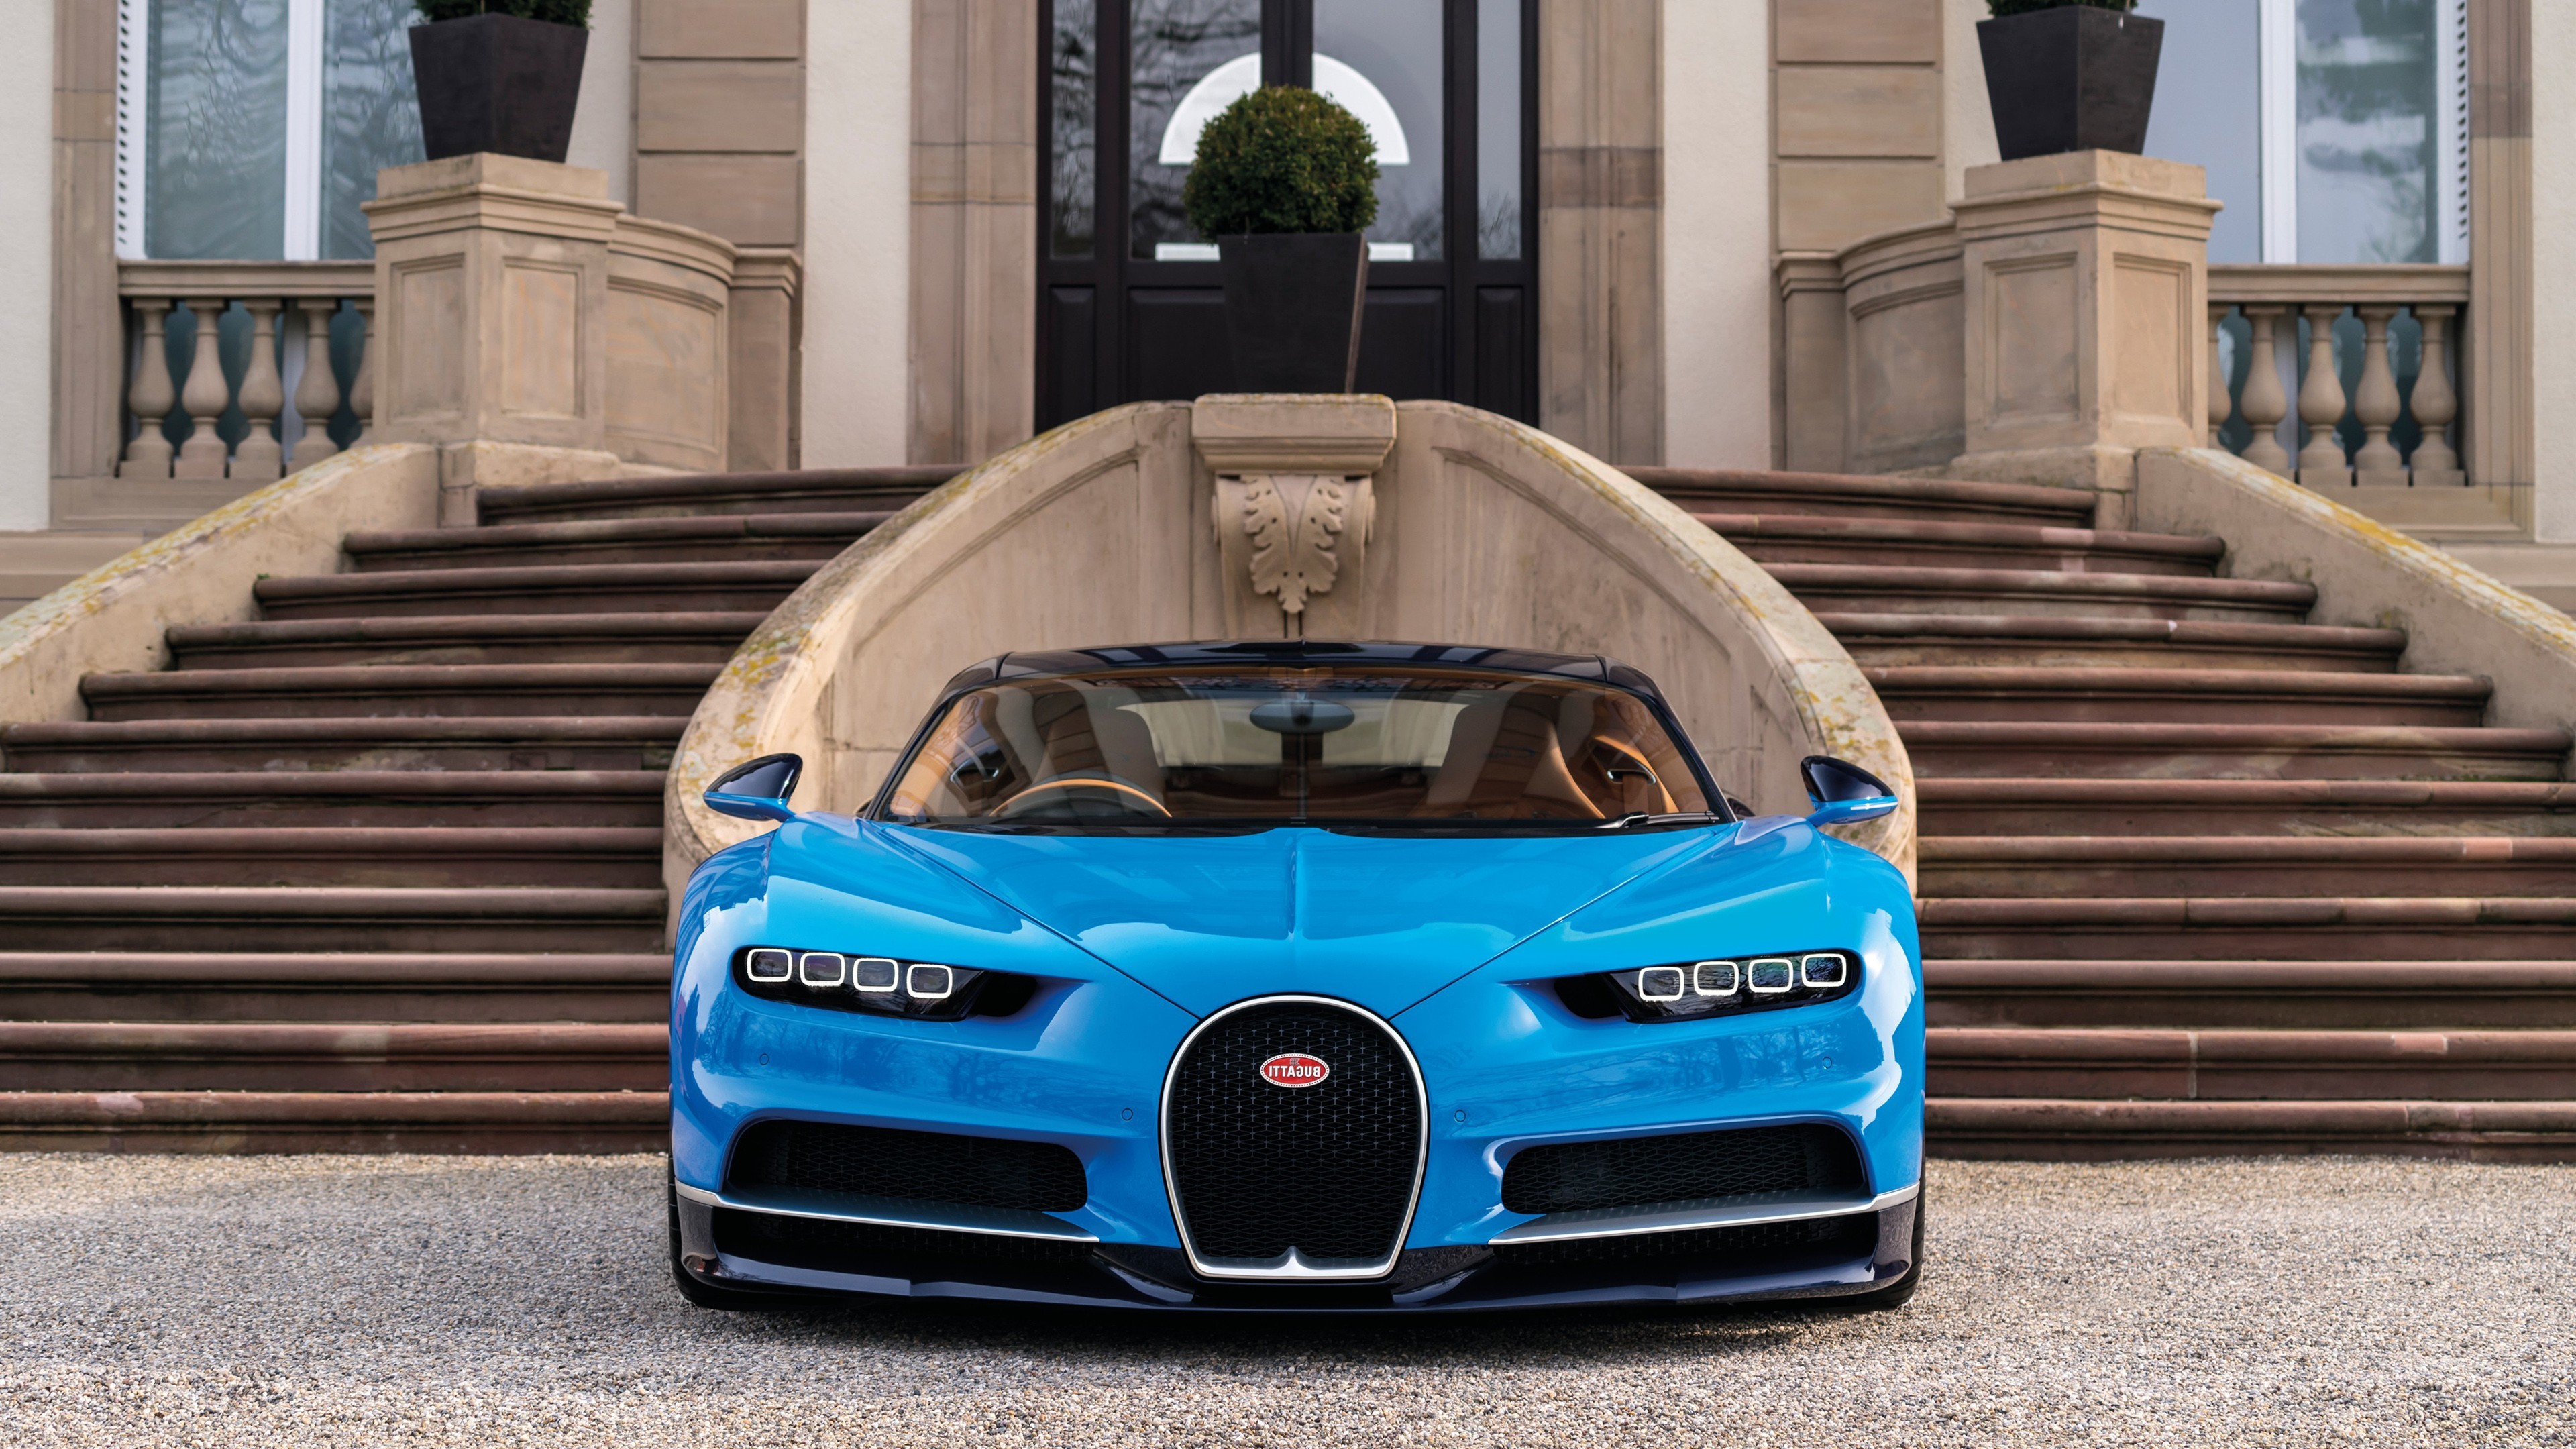 2017 Bugatti Chiron, HD Cars, 4k Wallpapers, Images ...